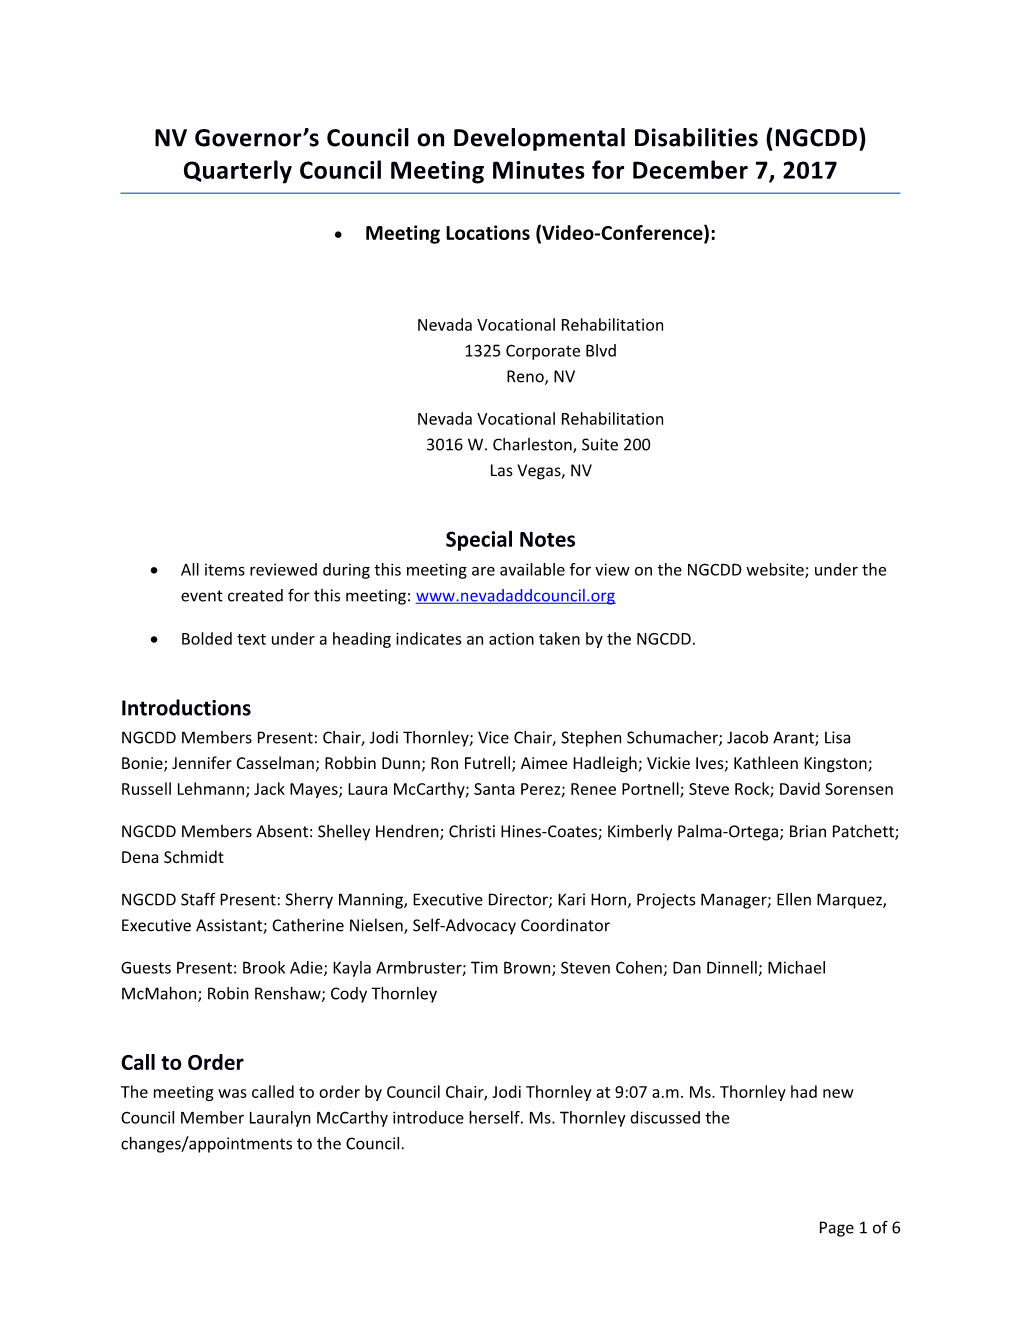 NV Governor S Council on Developmental Disabilities (NGCDD) Quarterly Council Meeting